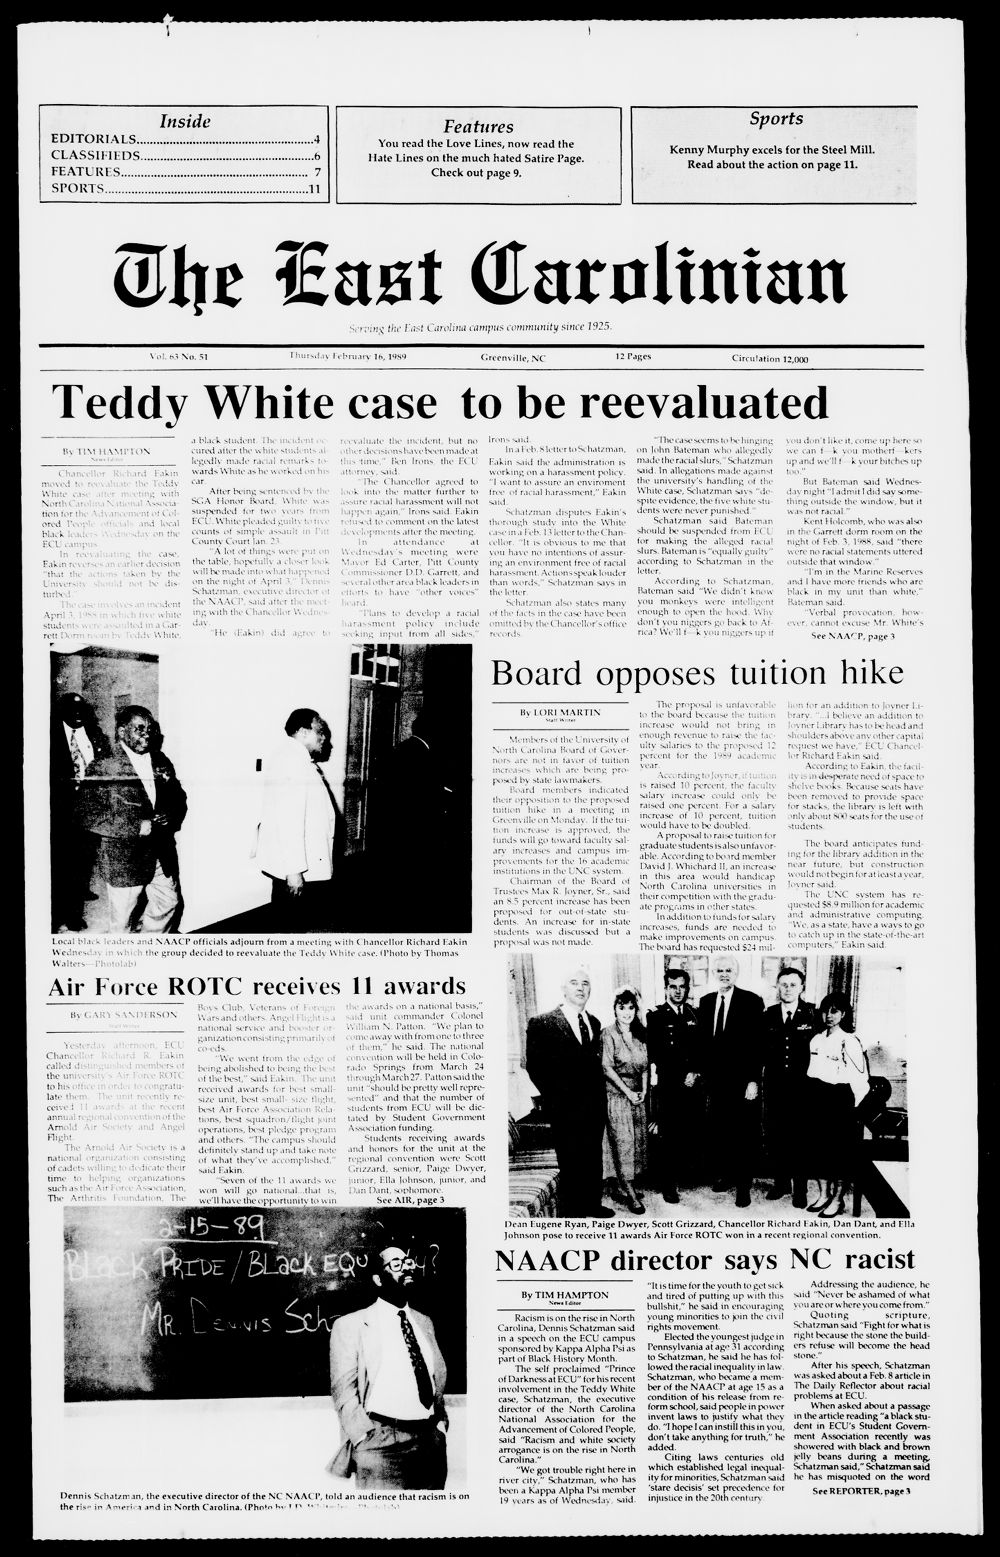 The East Carolinian, February 16, 1989 picture